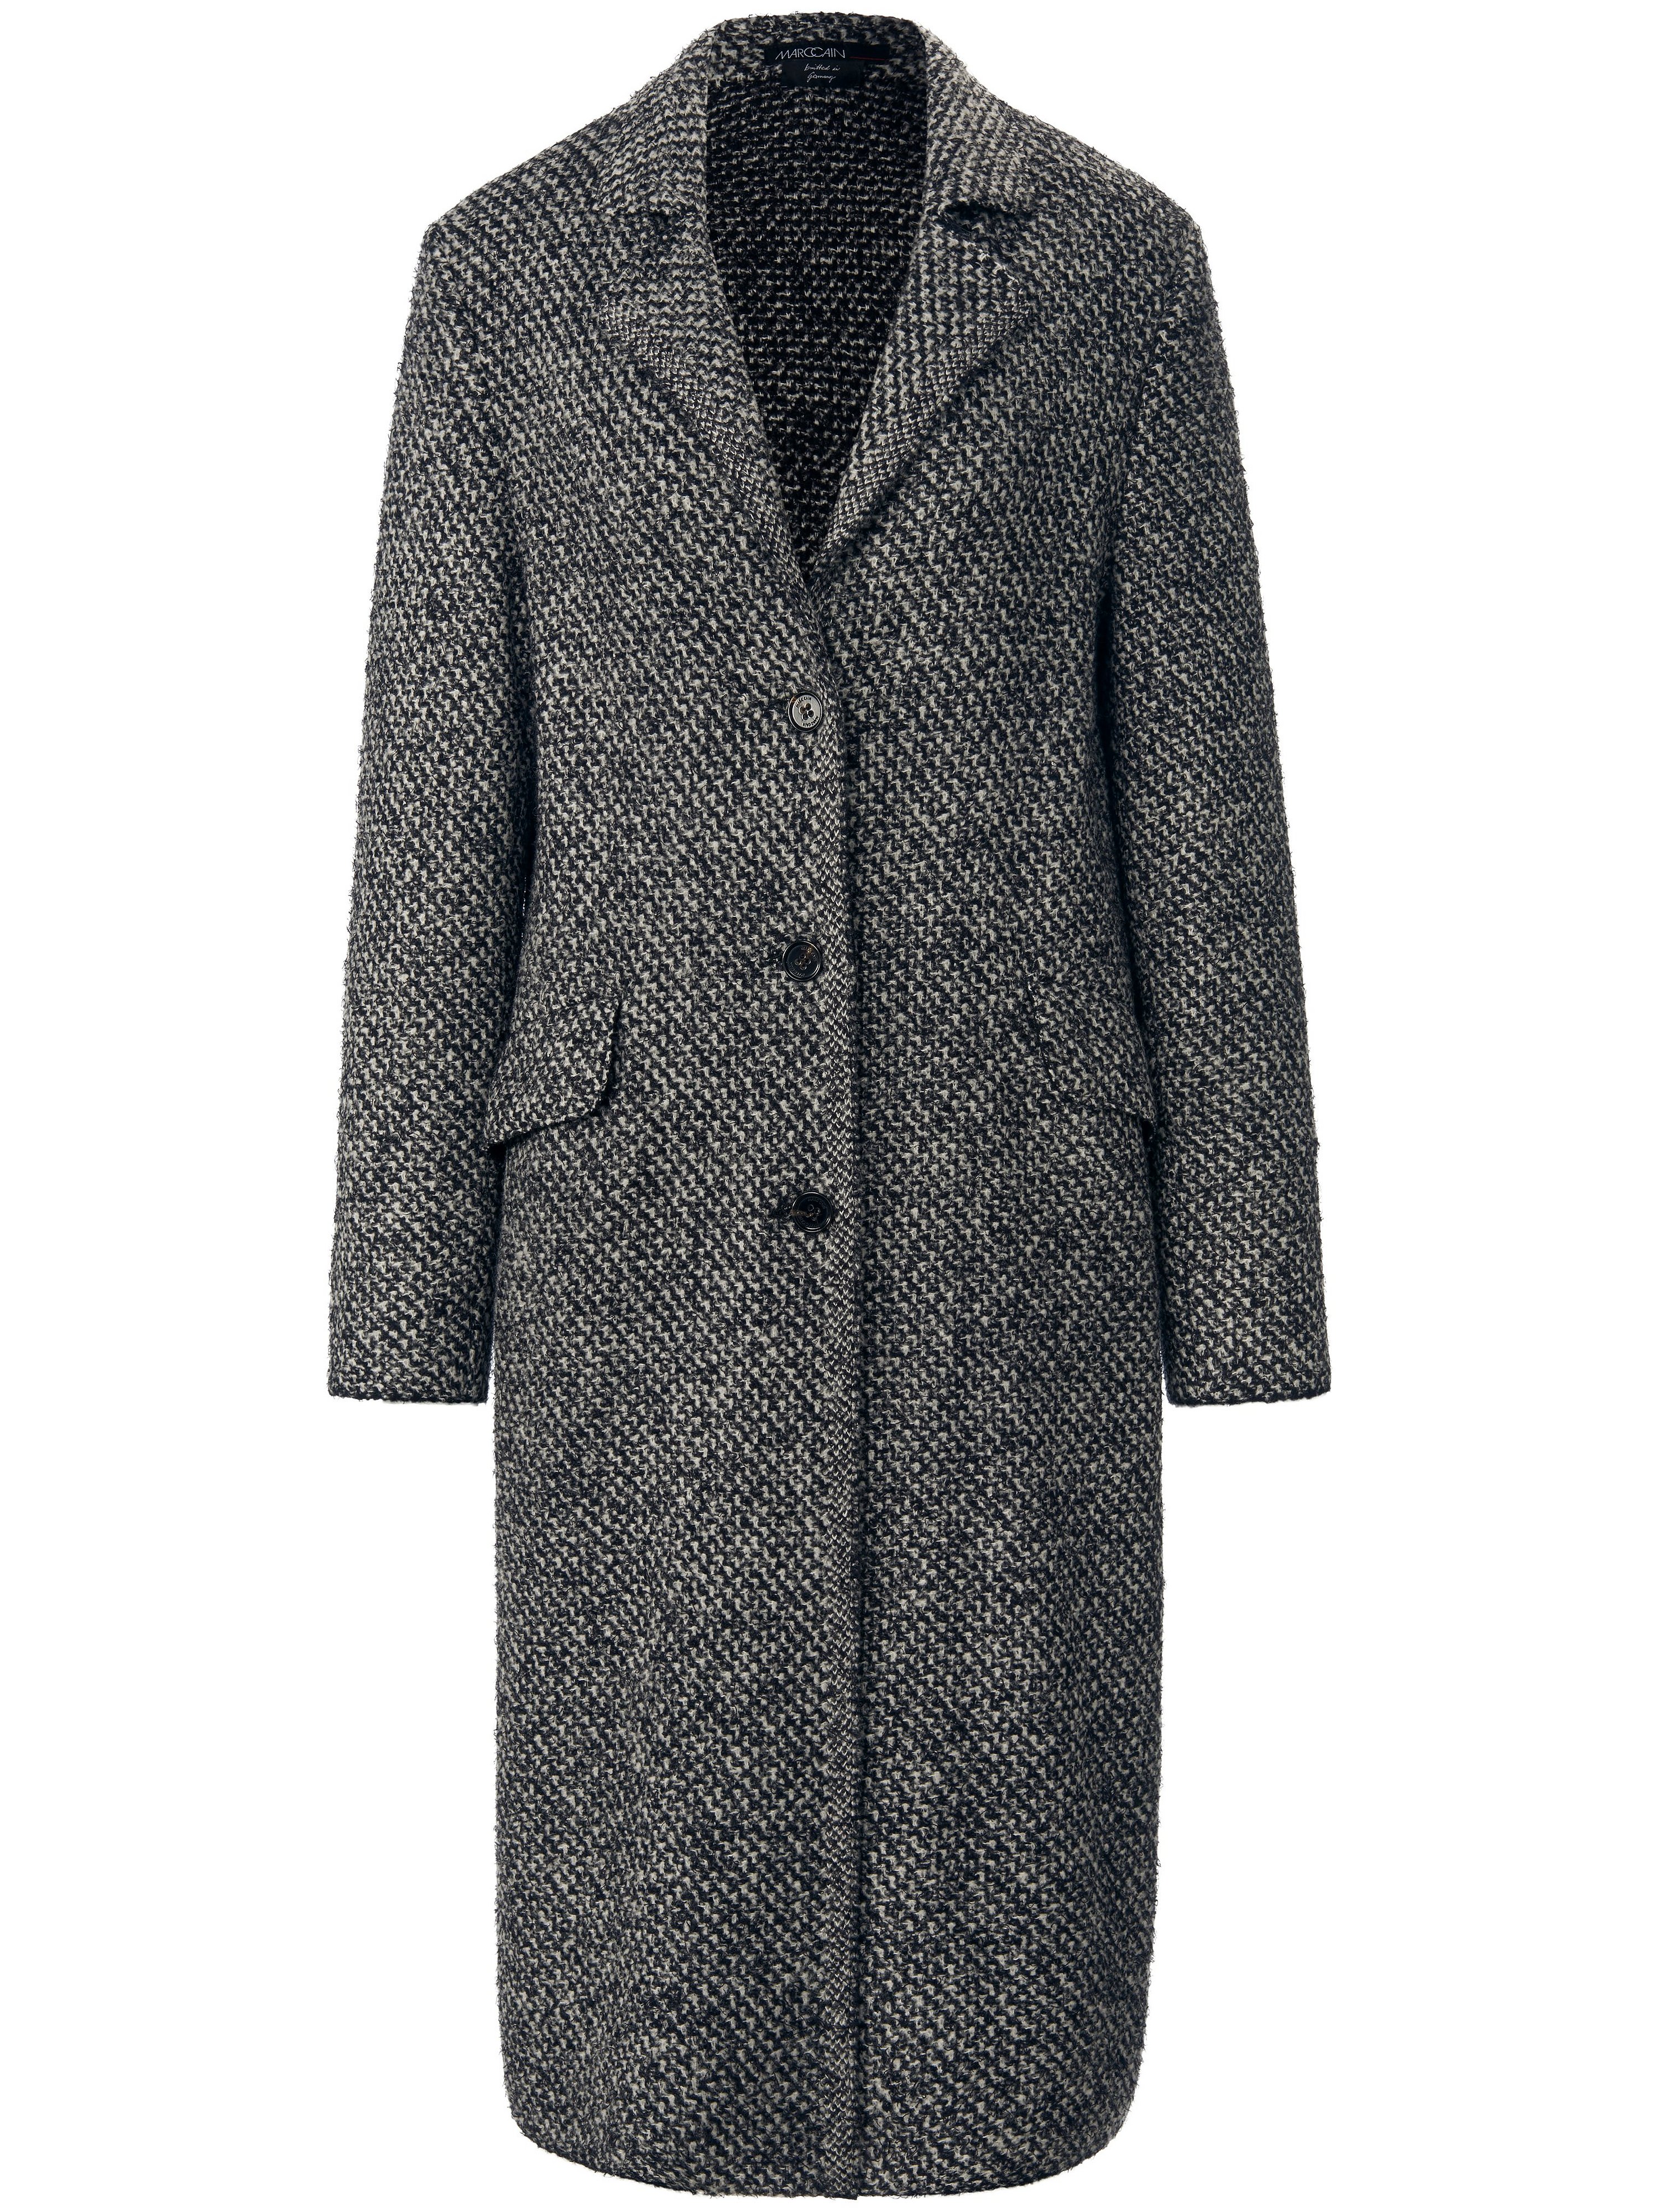 Knitted coat Marc Cain black